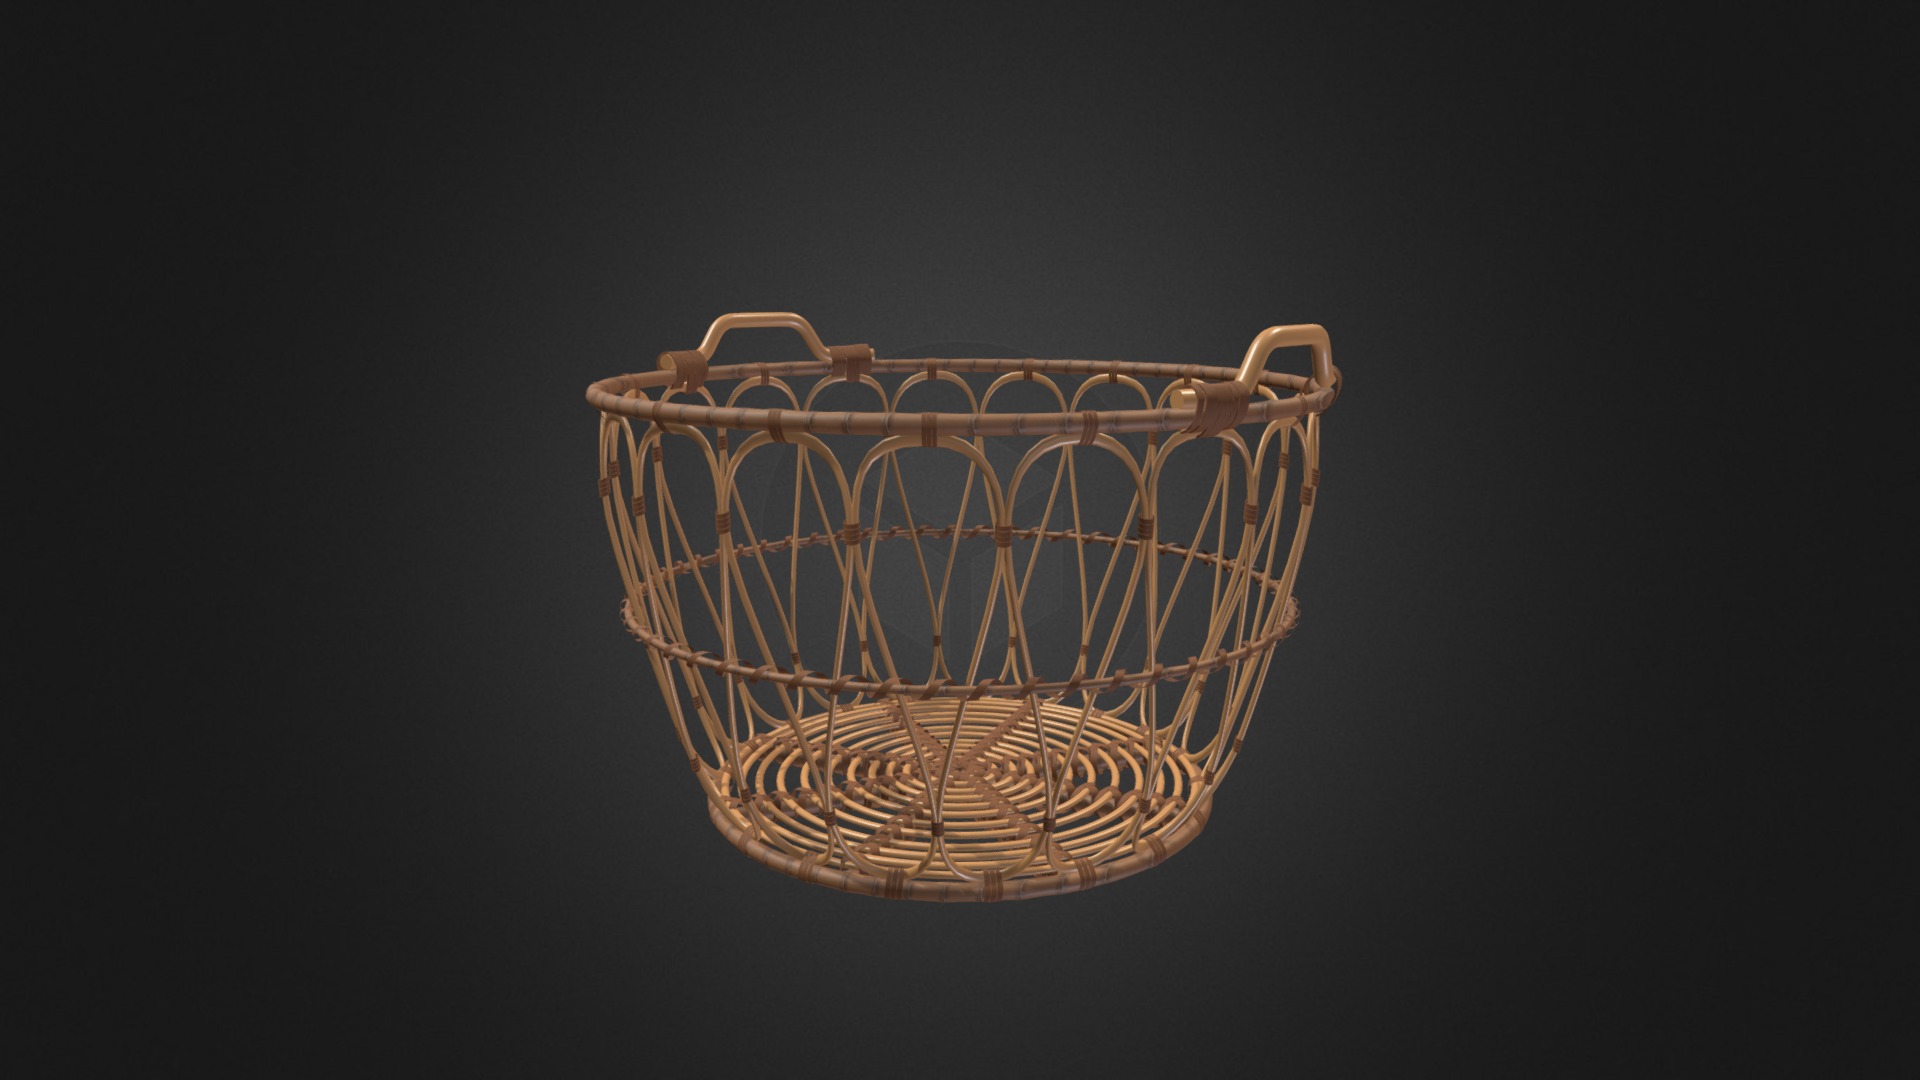 3D model Rattan Basket Ikea Snidad - This is a 3D model of the Rattan Basket Ikea Snidad. The 3D model is about a basketball hoop with a net.